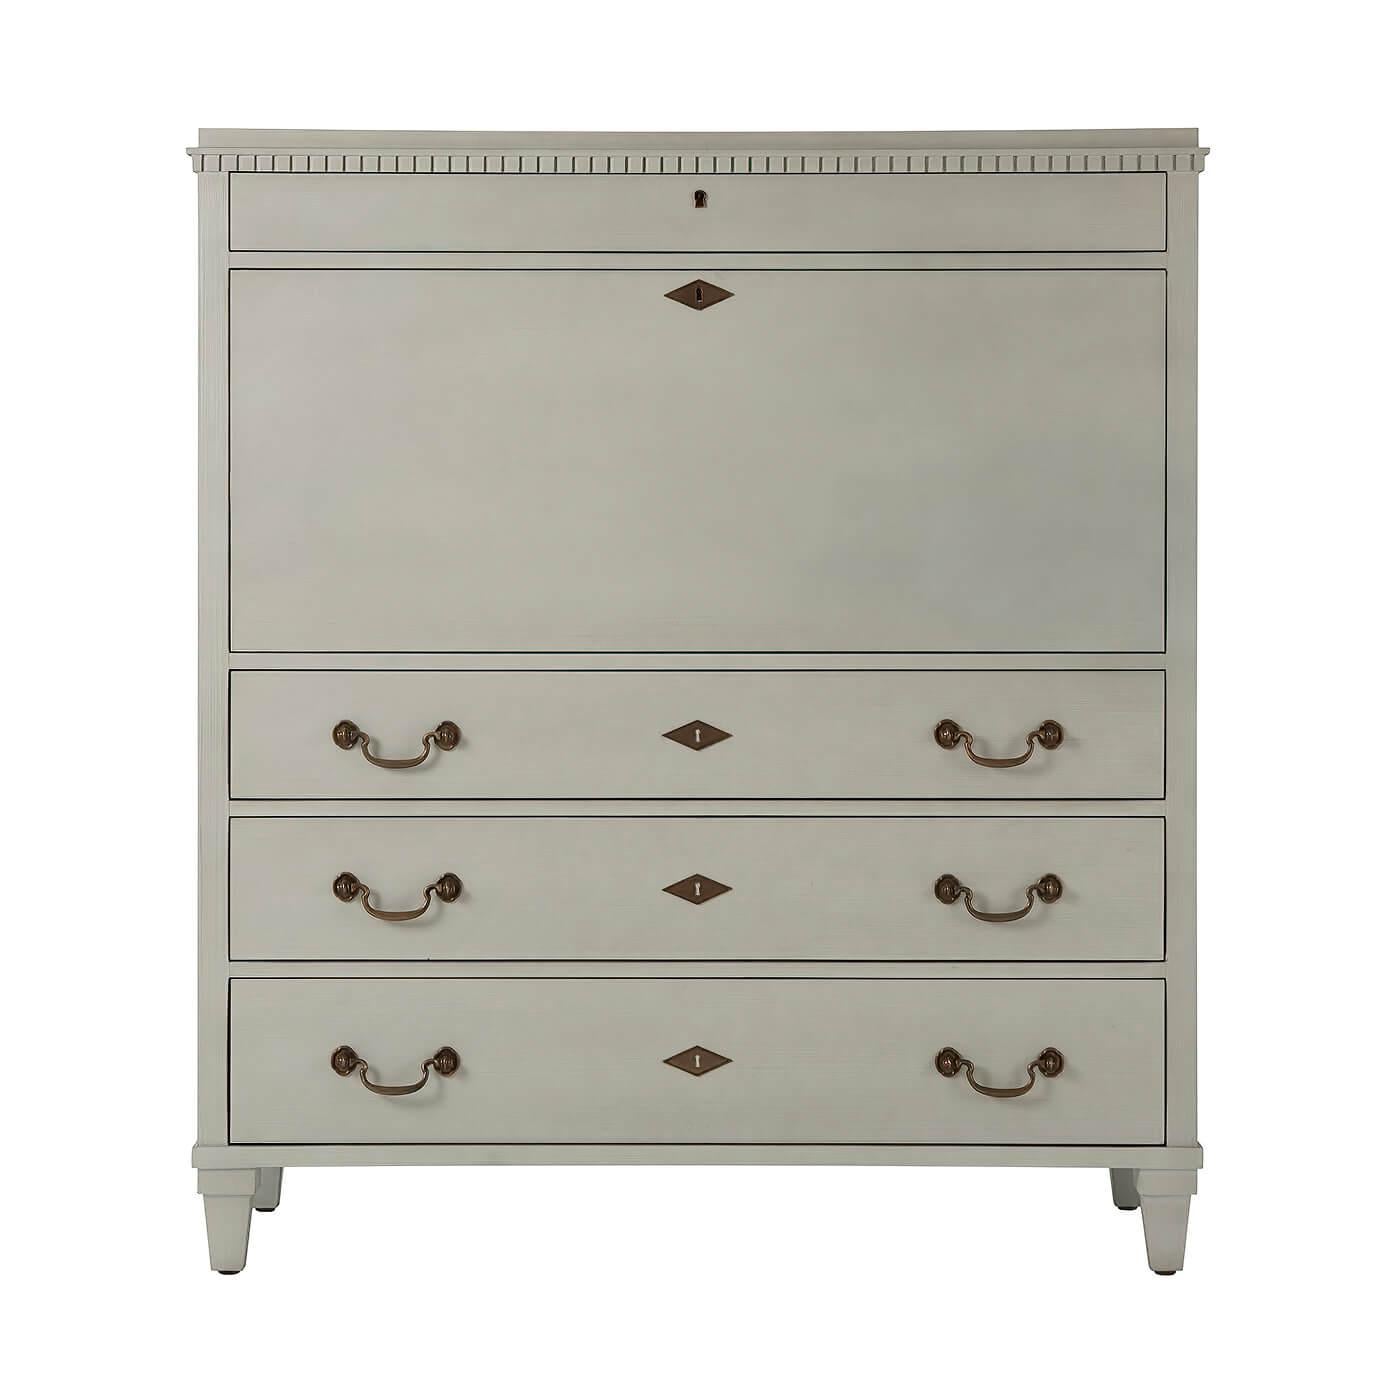 French Provincial style Secrétaire à Abbatant with a grey-blue painted exterior fall front writing surface.
Soft ivory painted interior with drawers & pigeon holes, interior rotating cabinet with mirror back
power management strip. A dental molded